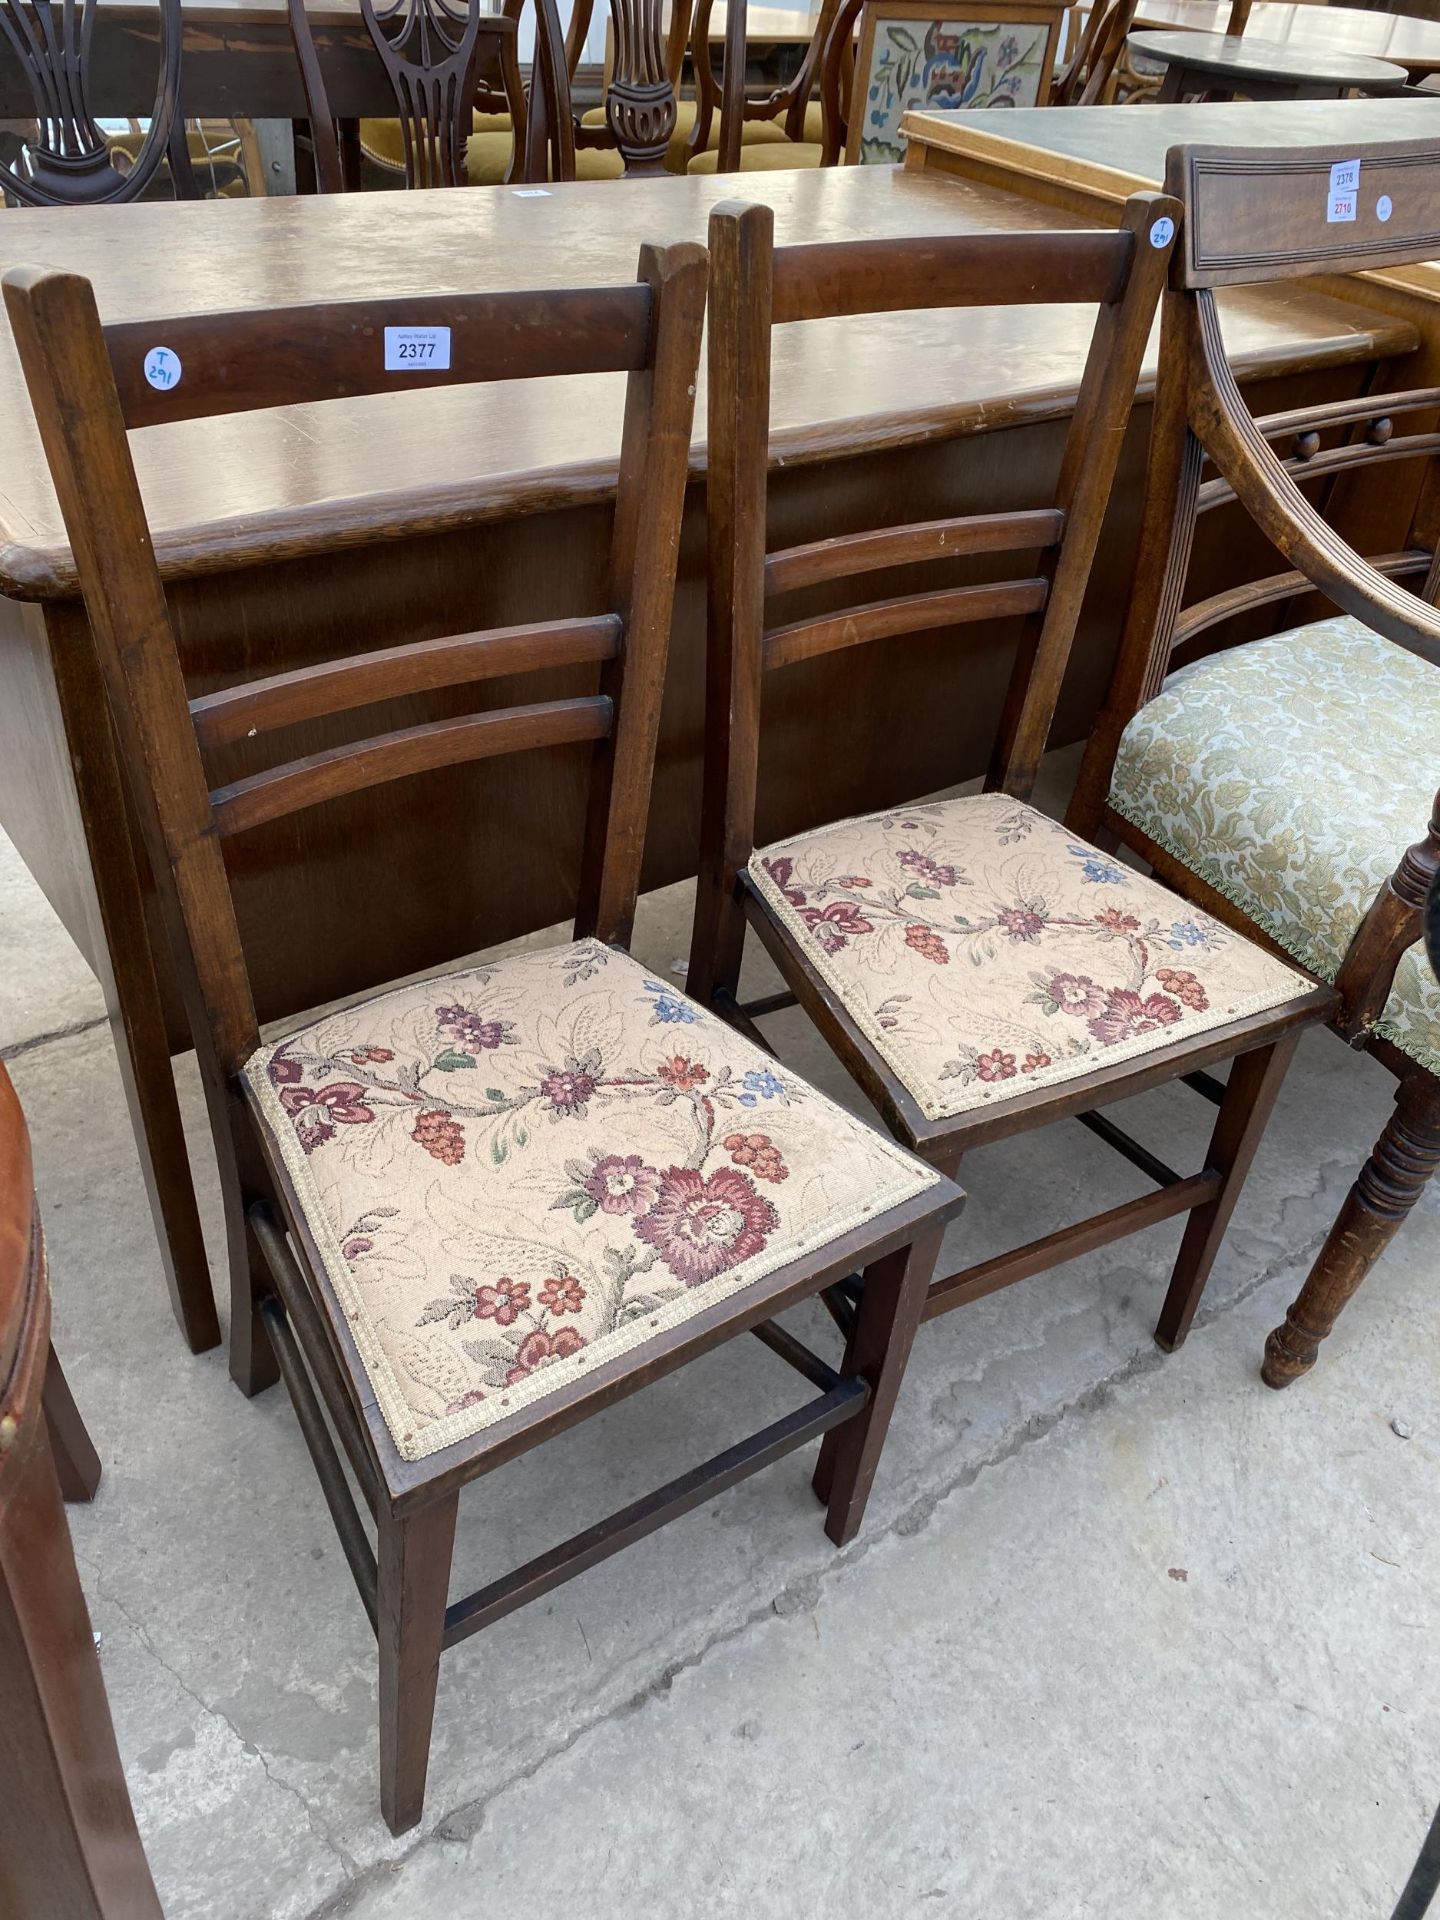 A PAIR OF EDWARDIAN BEDROOM CHAIRS